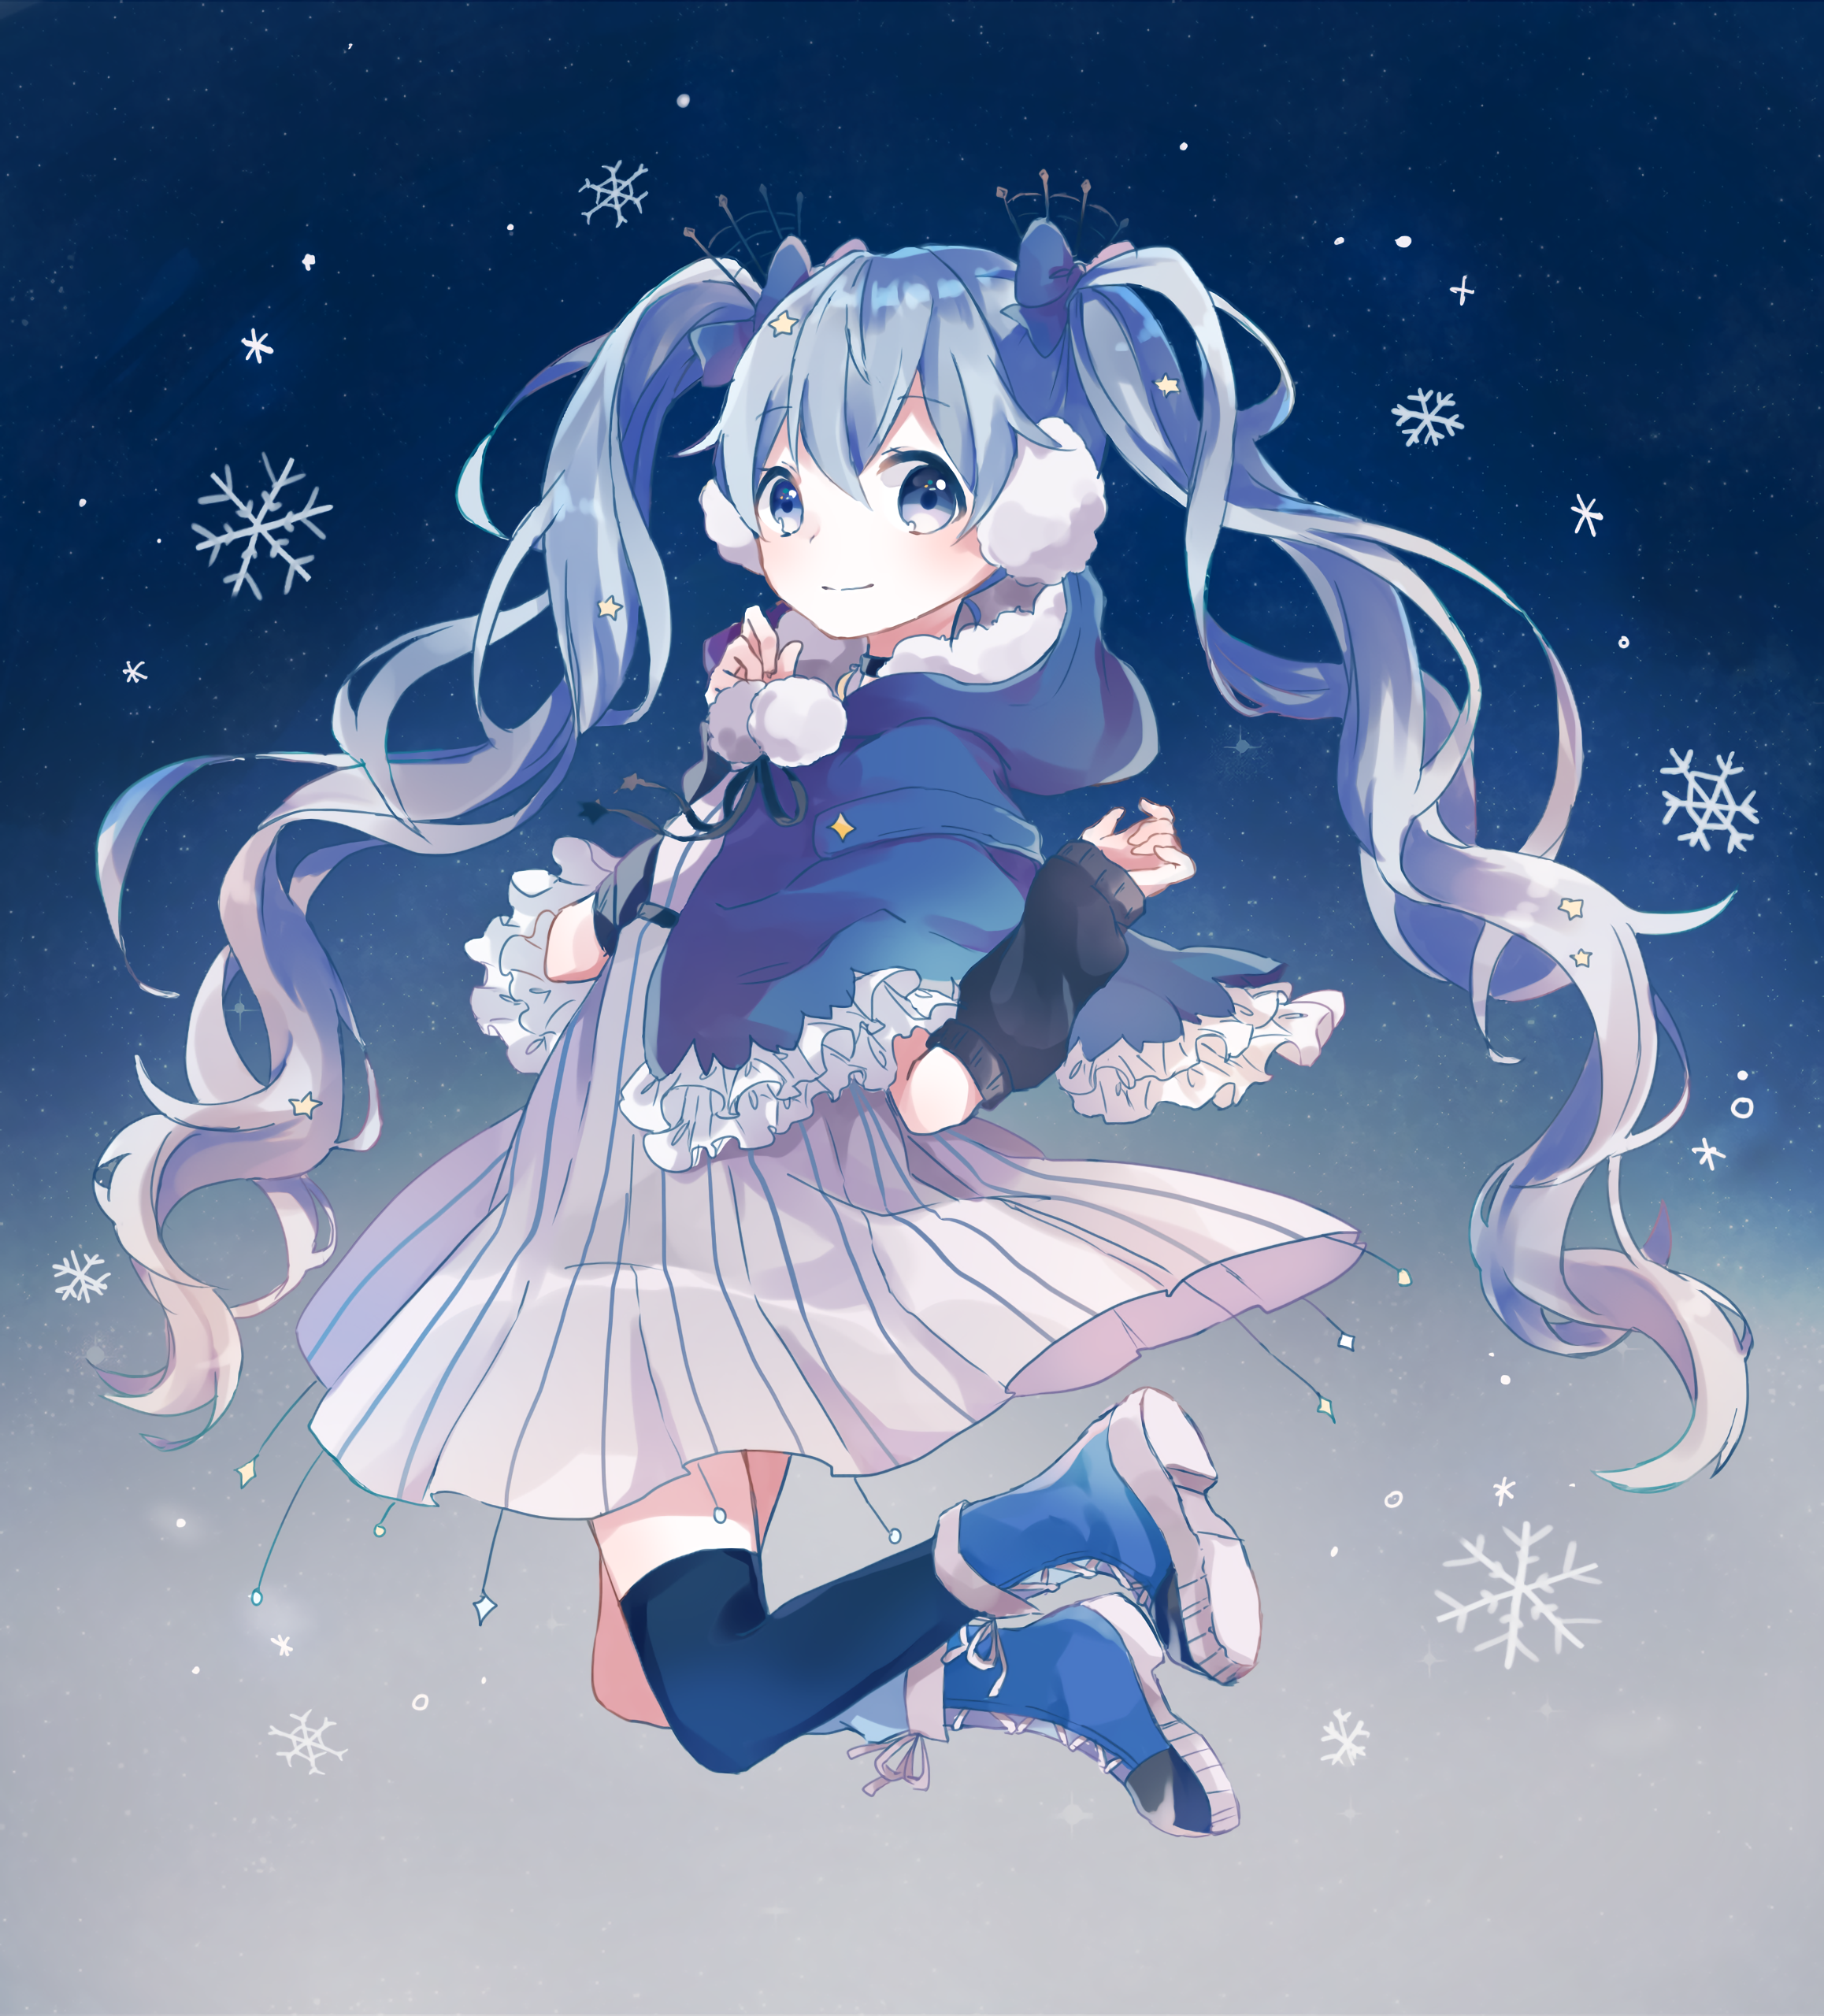 Anime Anime Girls Blue Hair Long Hair Blue Eyes Twintails Skirt Winter Snow Flakes Shoes Blue Shoes  2316x2560